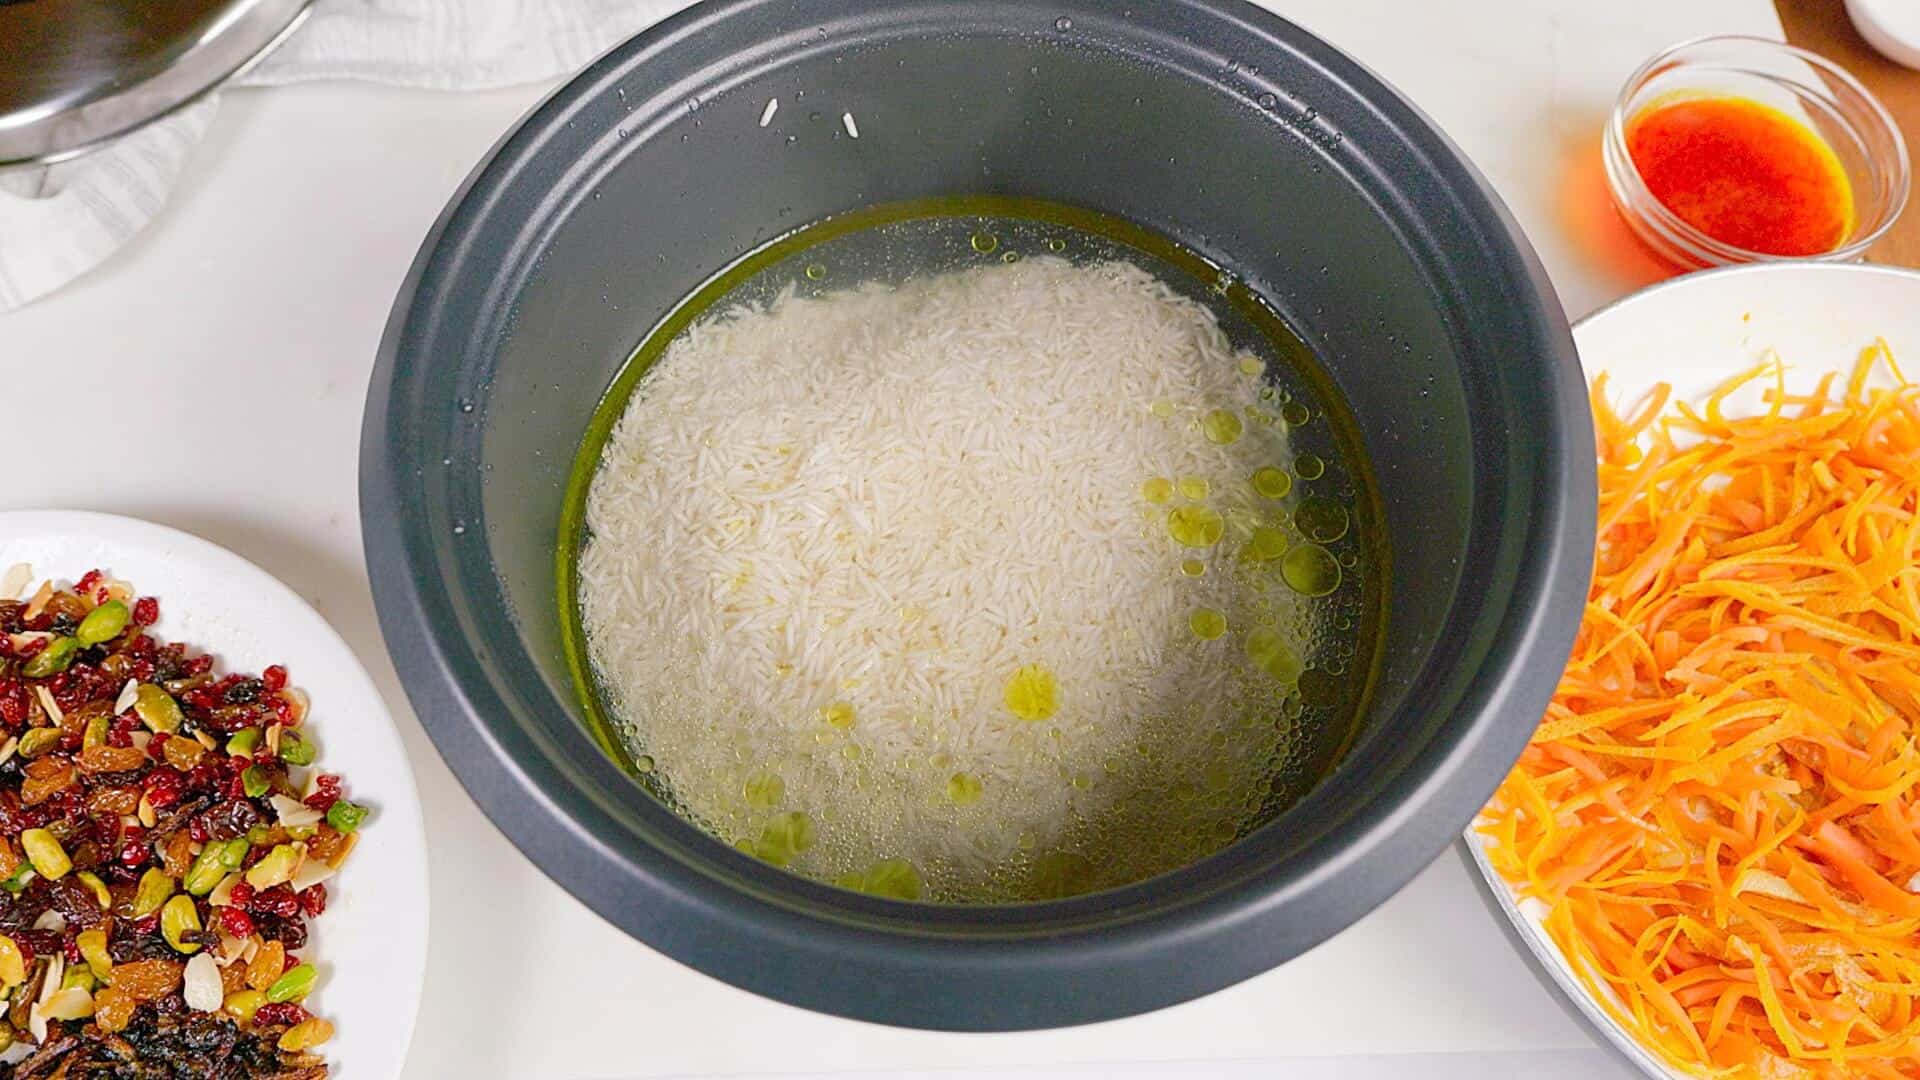 Cooking rice.